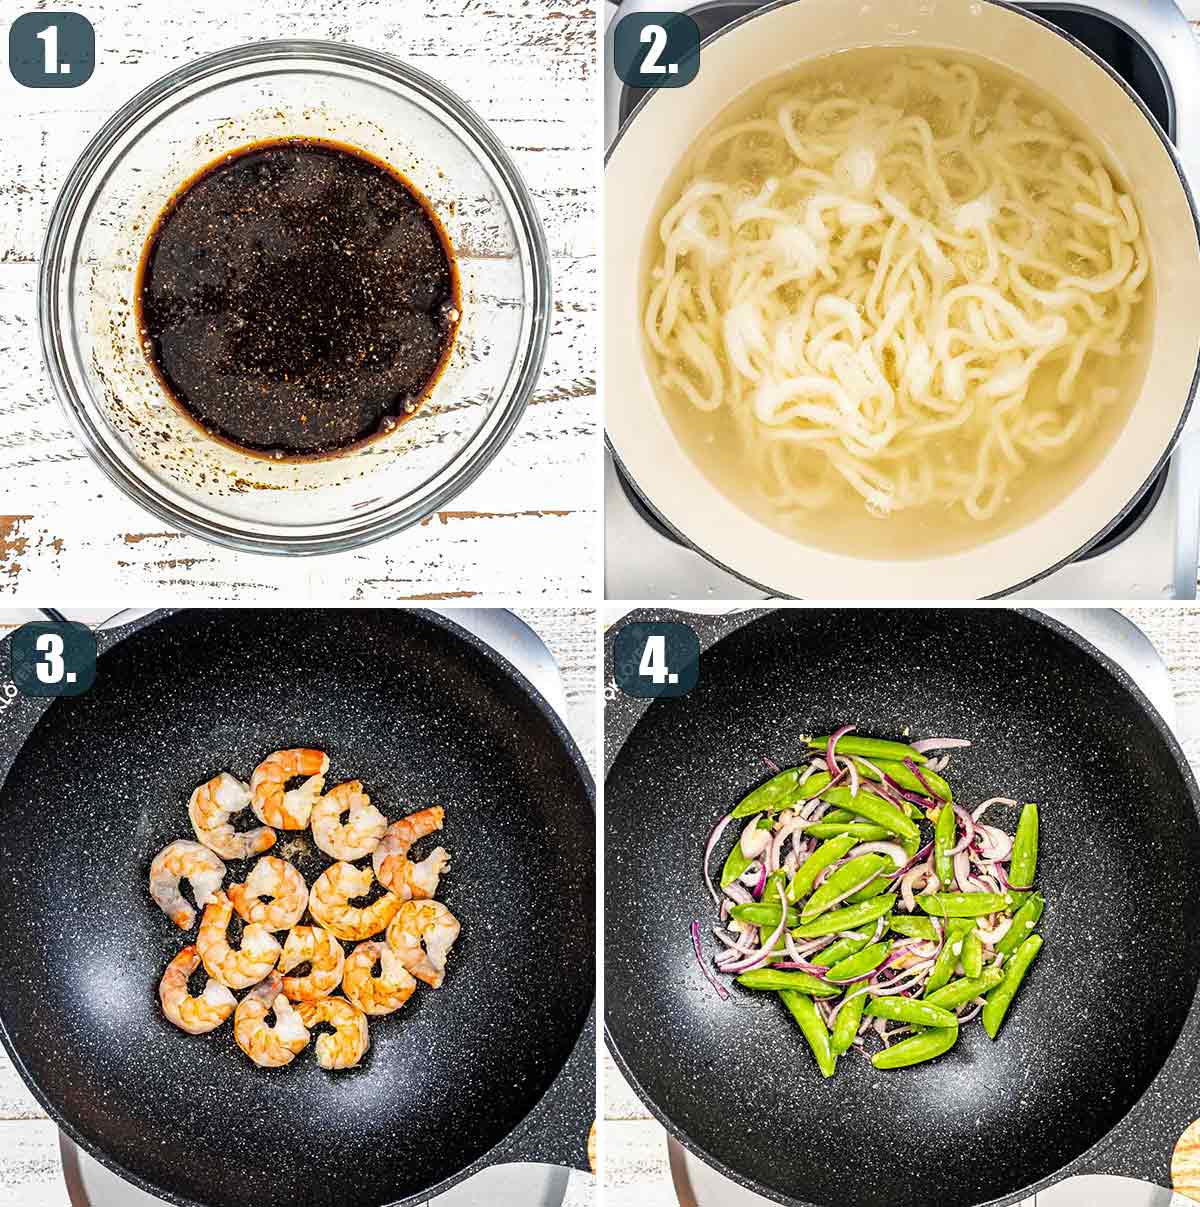 detailed process shots showing how to prep ingredients for black pepper udon noodles with shrimp.